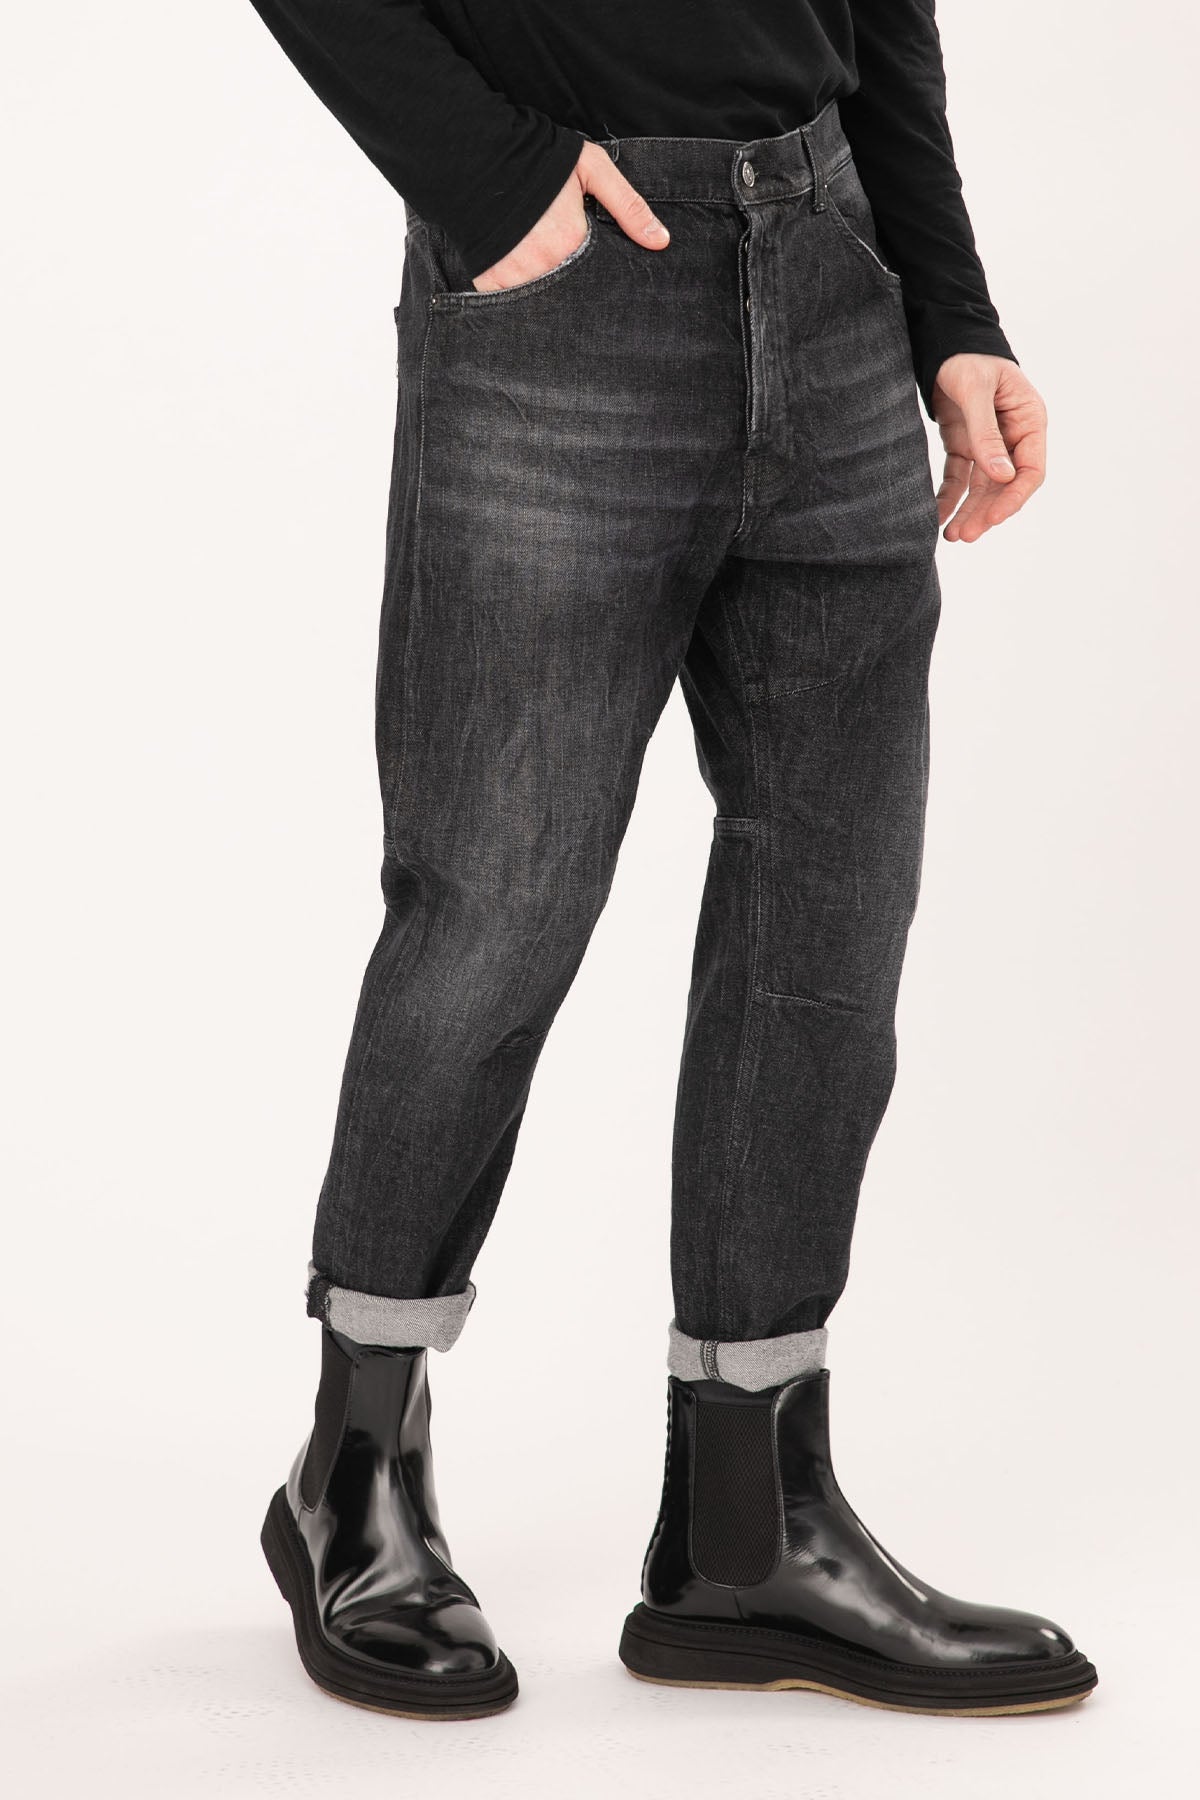 Dondup Chris Tapered Fit Jeans-Libas Trendy Fashion Store